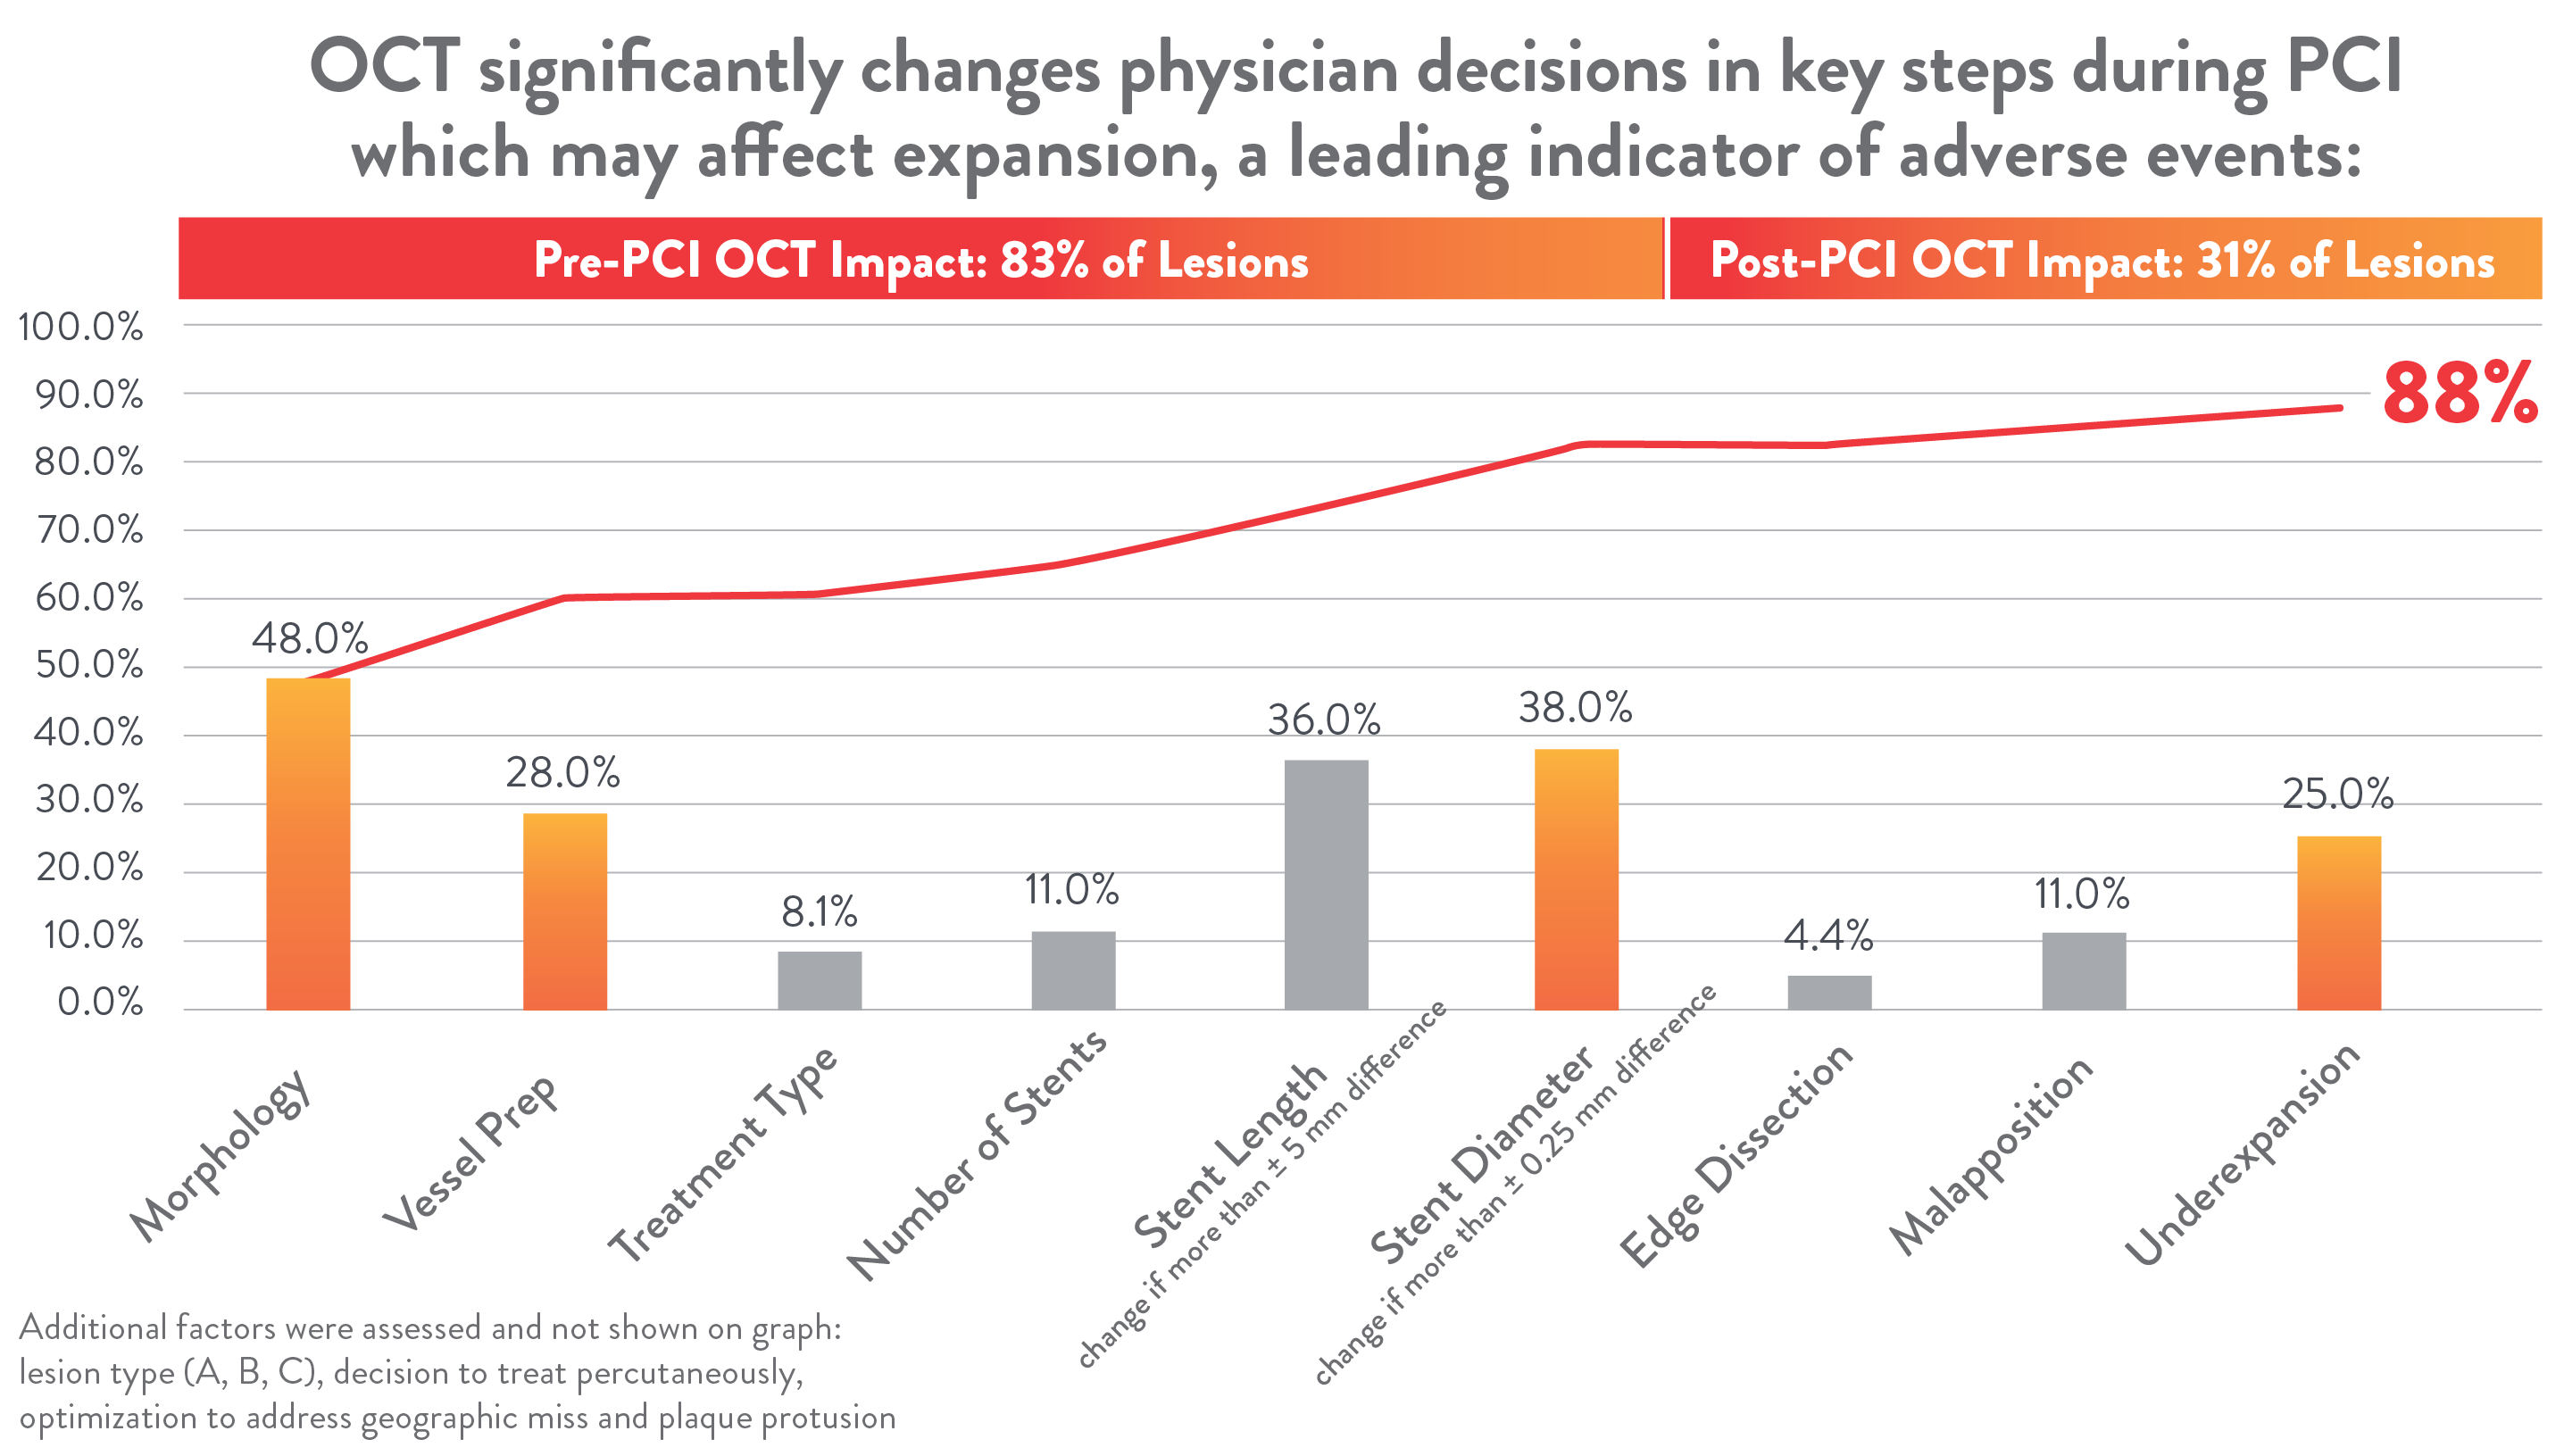 OCT significantly changes physicians decisions at steps in a PCI that impact final stent expansion